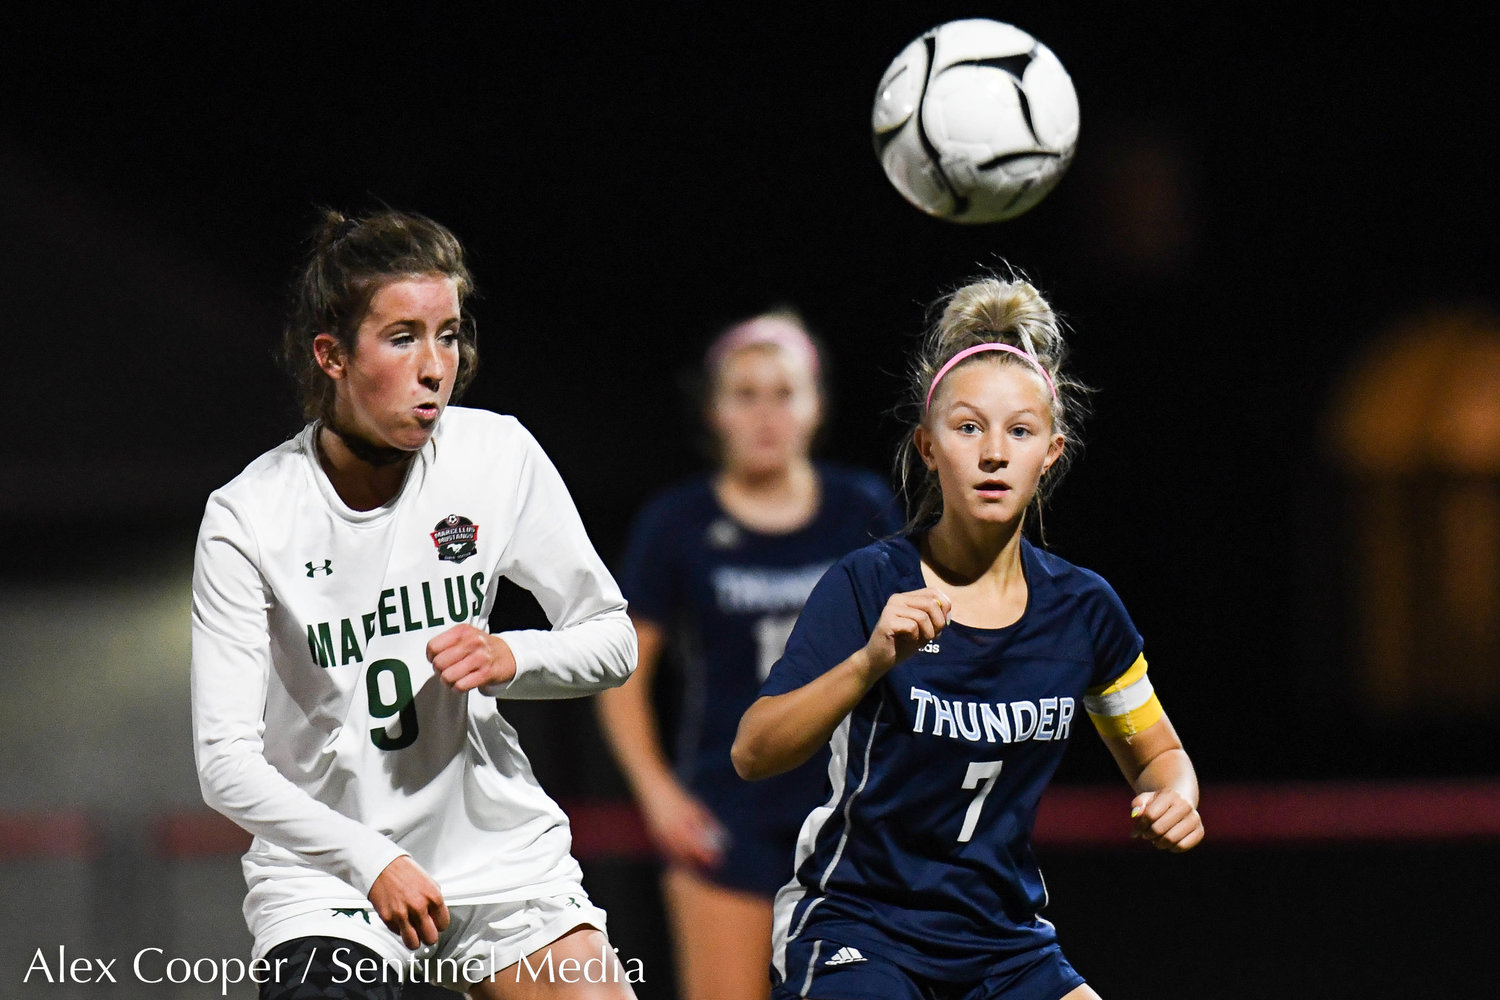 Central Valley Academy player Mallory Mower (7) attempts to settle the ball with Marcellus player Claire Card (9) during the Class B girls soccer semifinals game on Wednesday, Oct. 26 at Chittenango High School. CVA won 2-0.